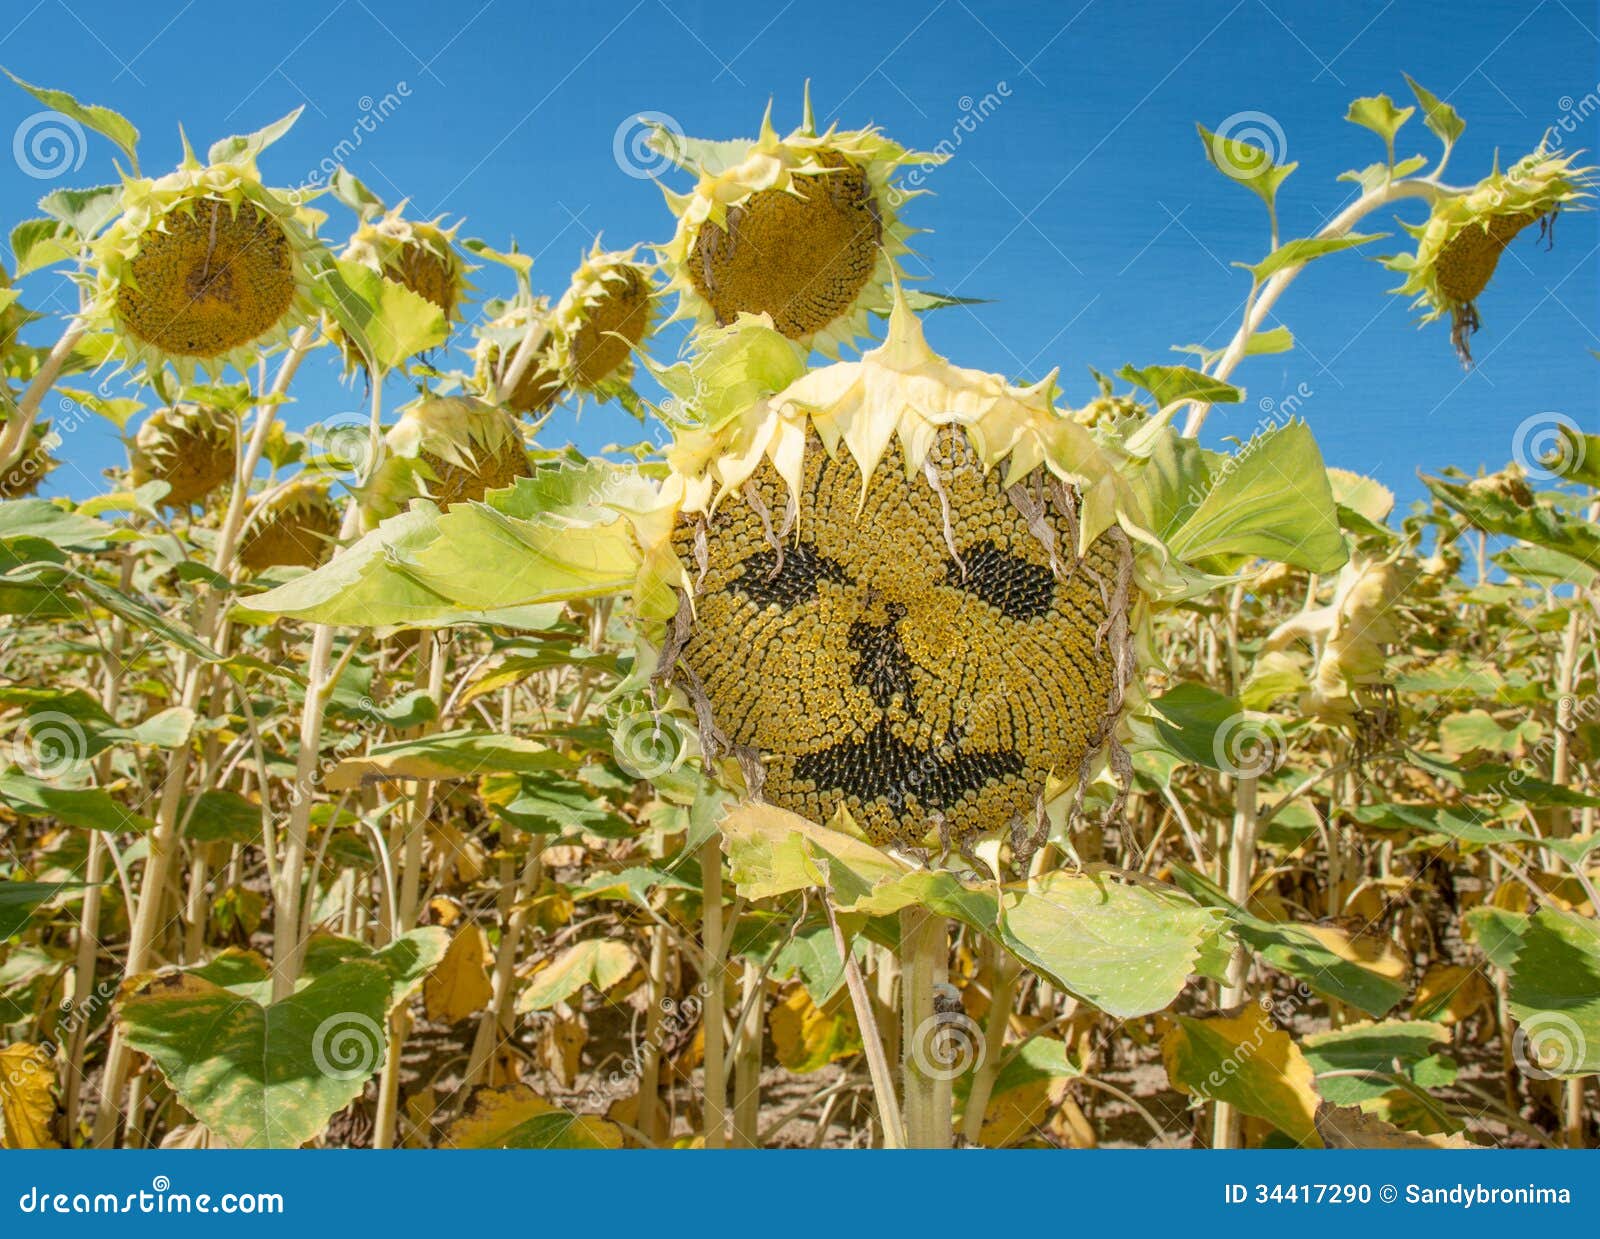 Sunflower Face stock photo. Image of nature, face, outdoors - 34417290